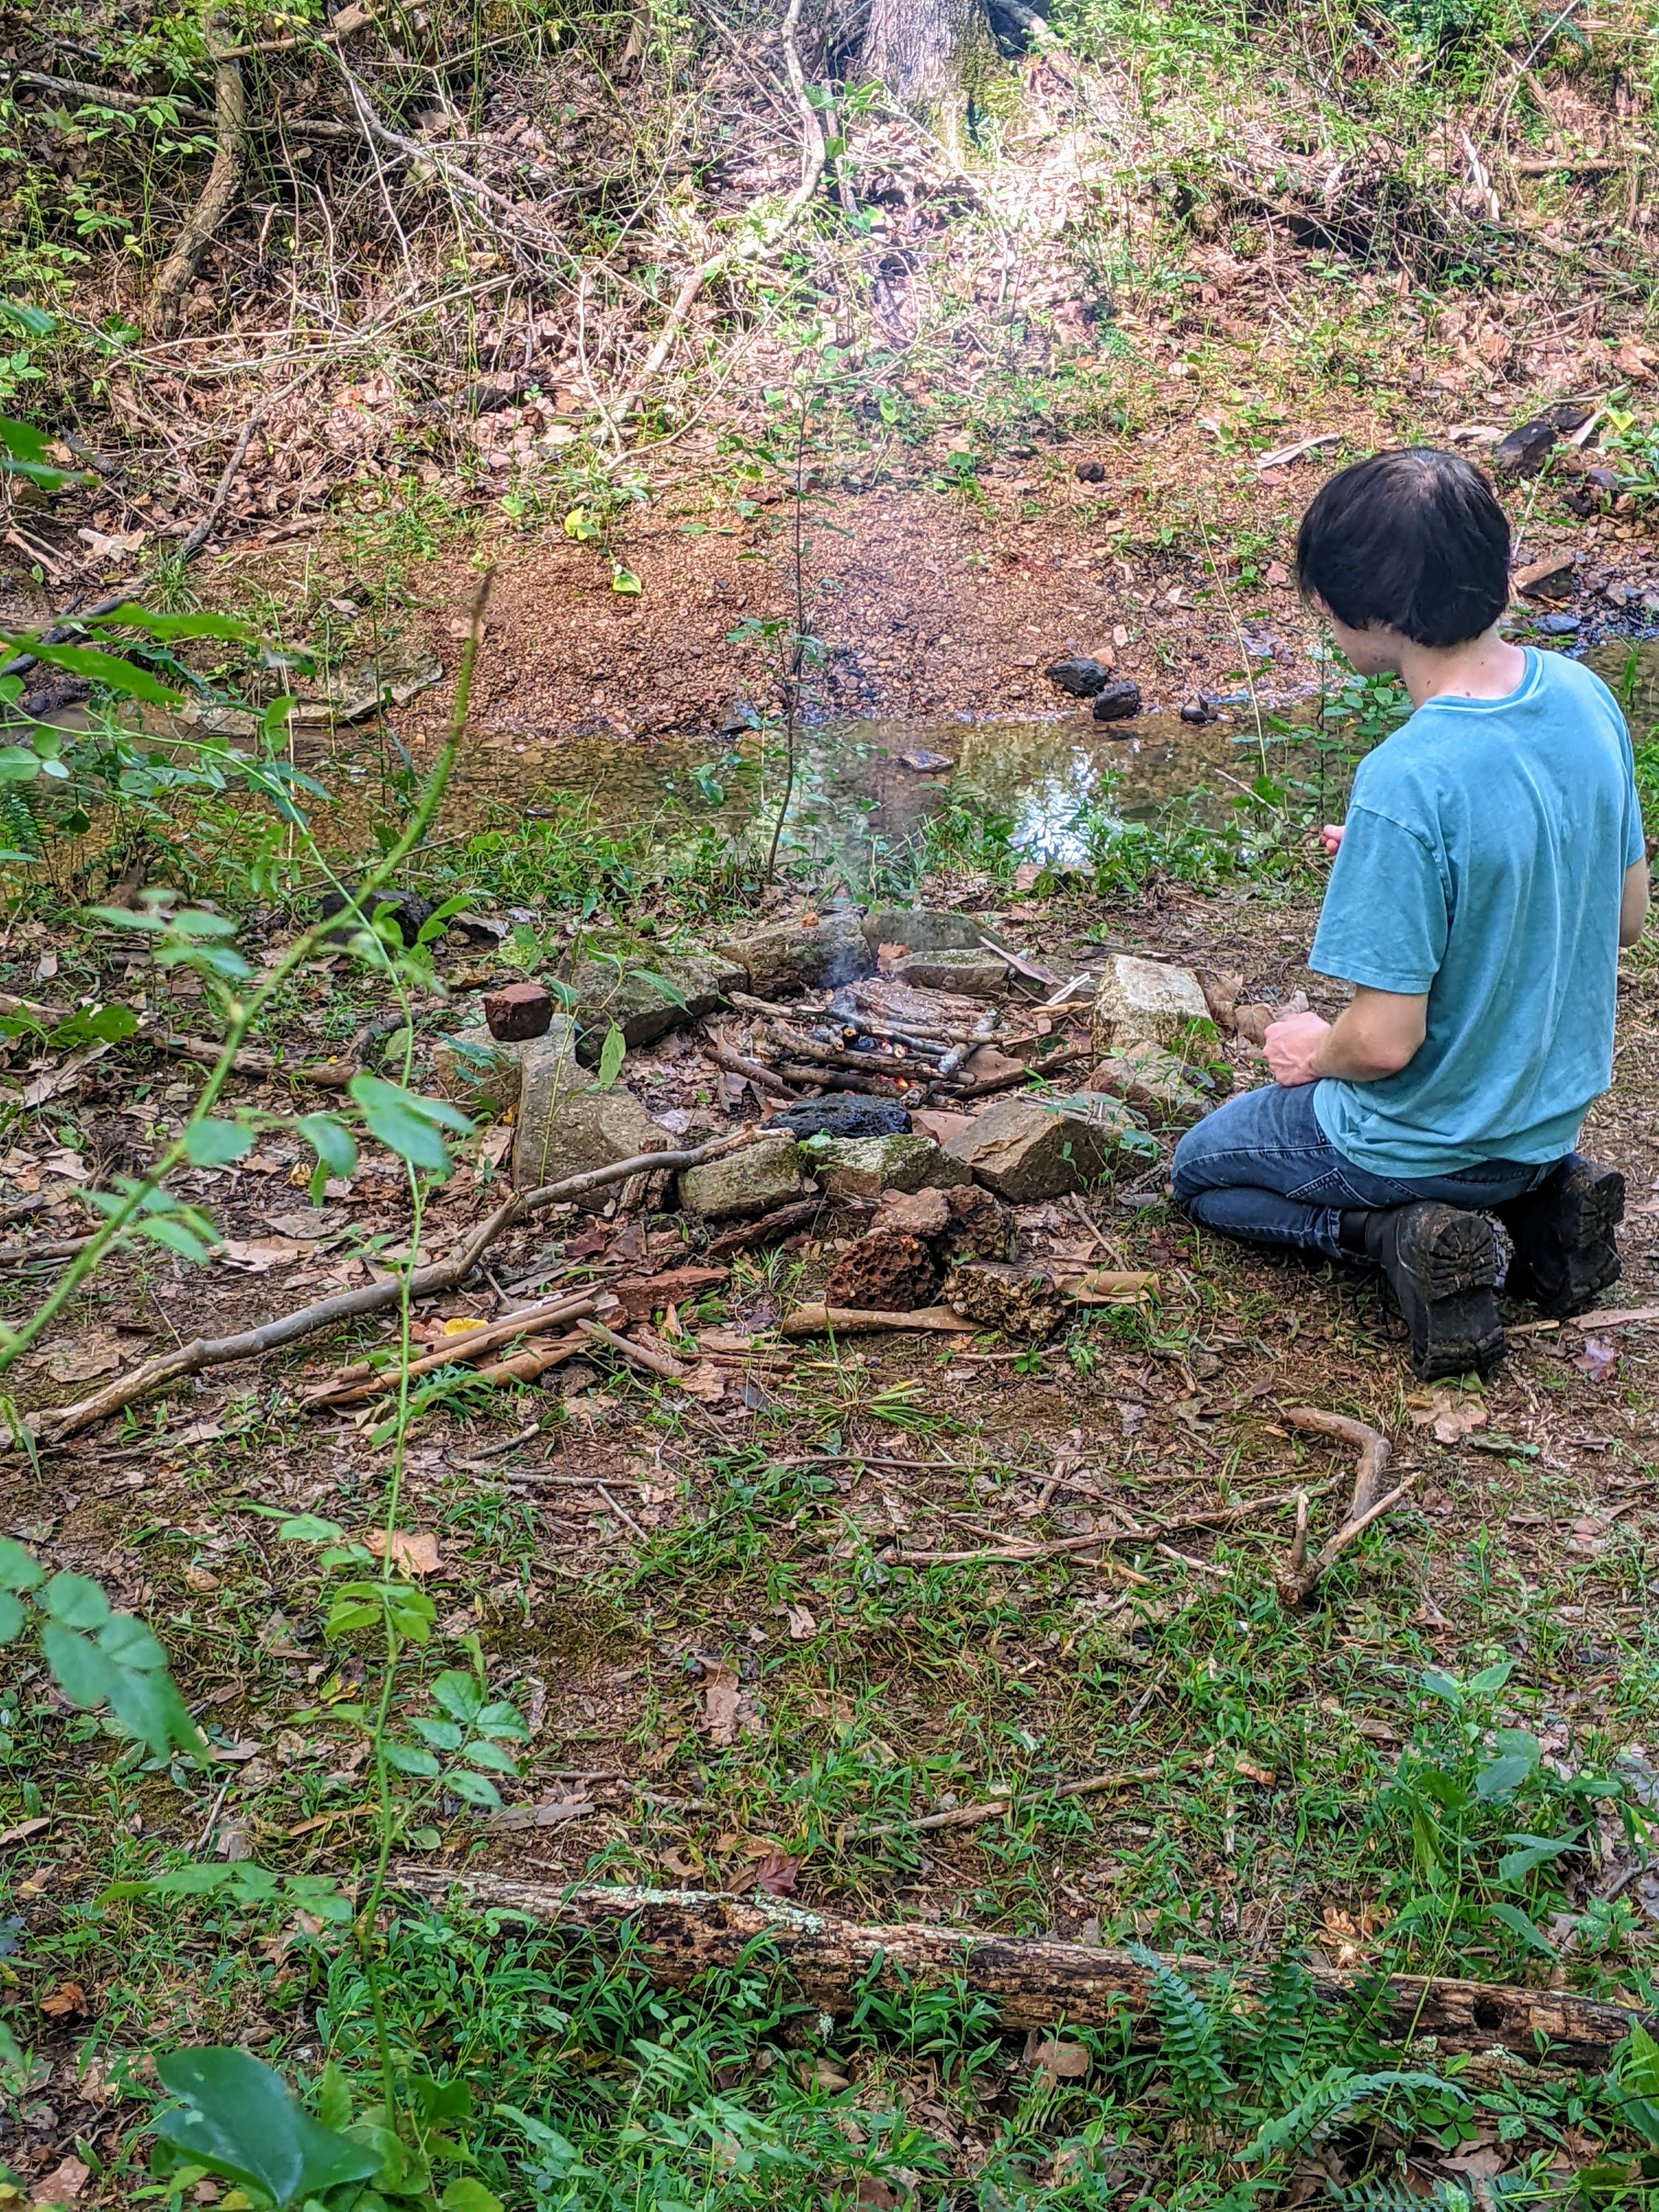 Student making fire